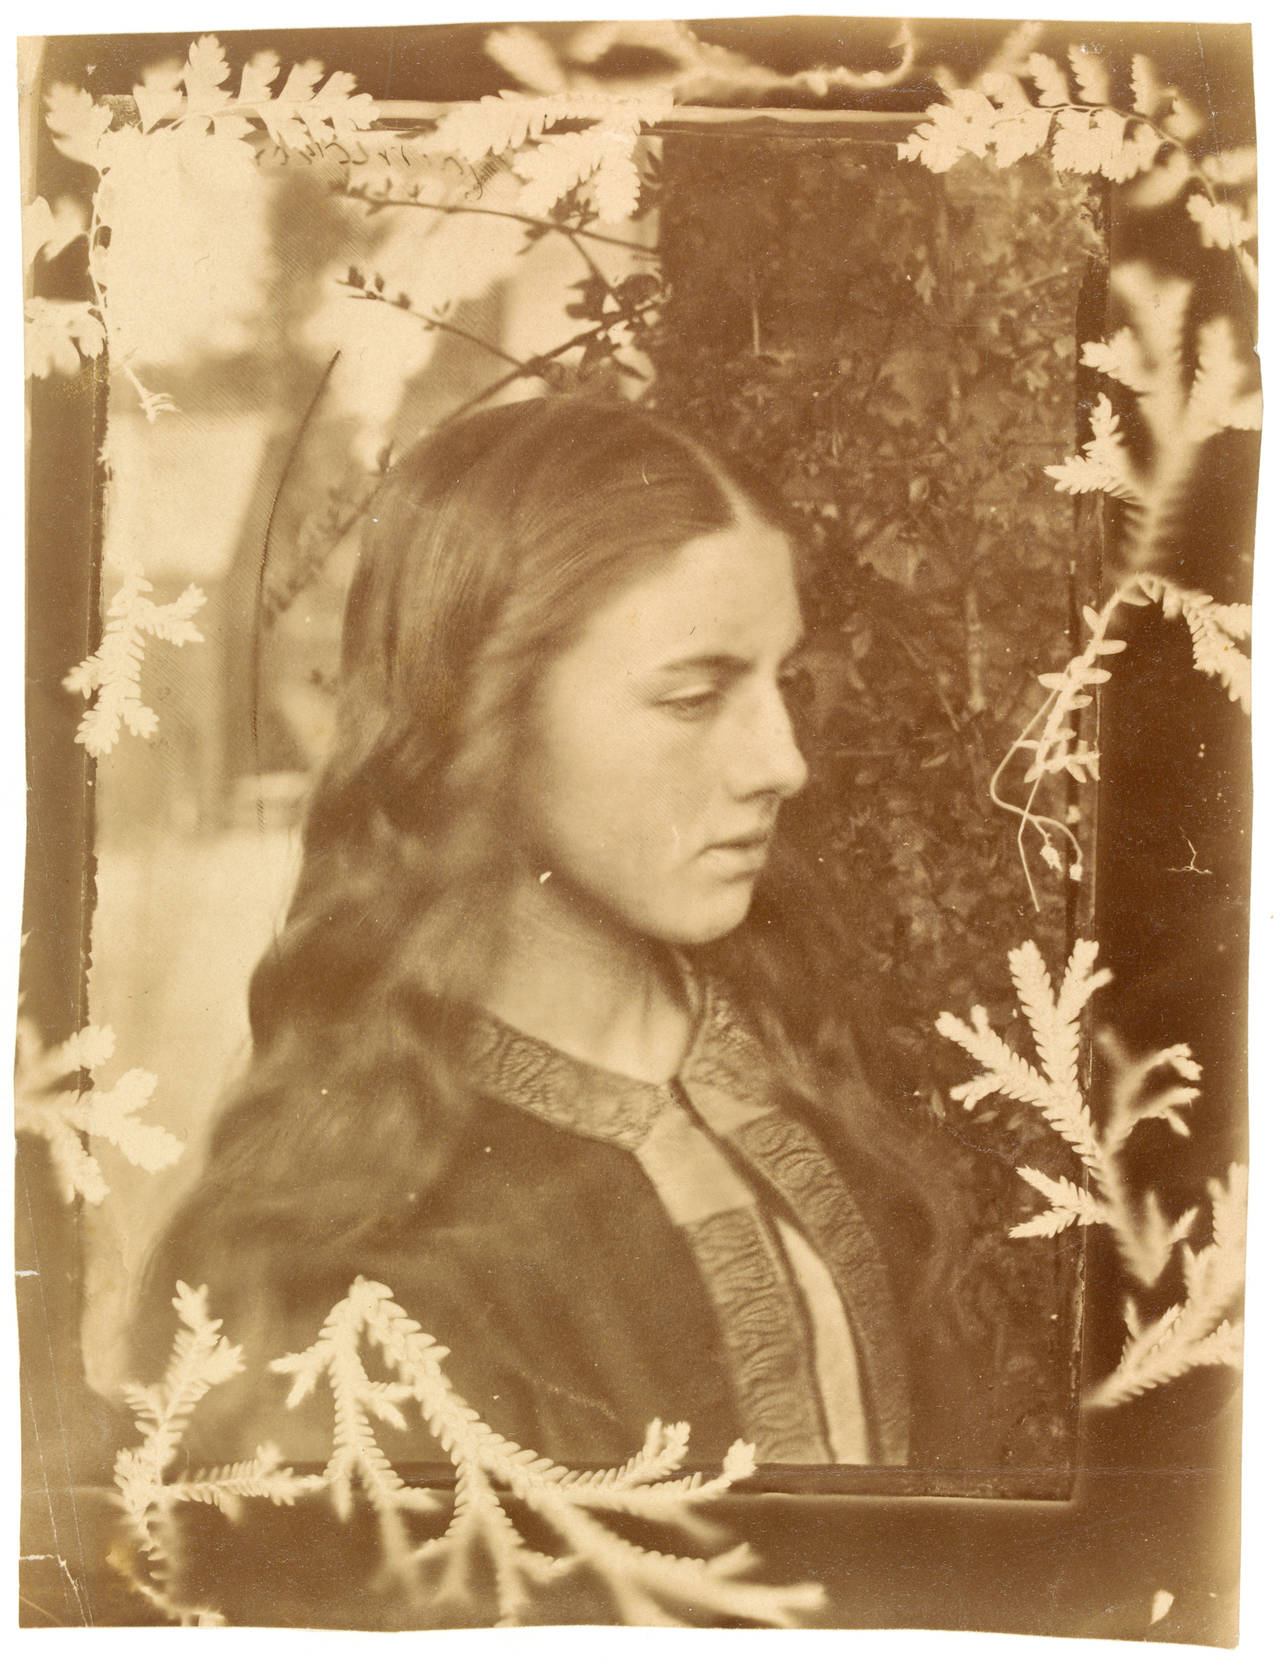 Kate Dore, photograph, by Oscar Gustaf Rejlander possibly in collaboration with Julia Margaret Cameron, printed by Julia Margaret Cameron, about 1862, England. Museum no. PH.258-1982. © Victoria and Albert Museum, London